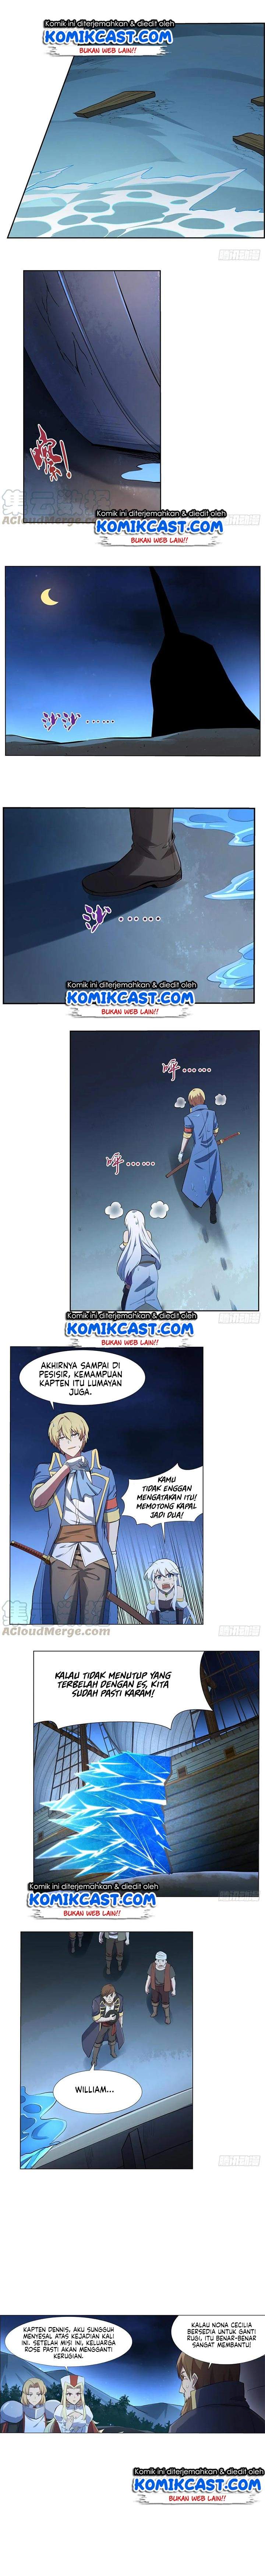 The Demon King Who Lost His Job Chapter 115 Bahasa Indonesia